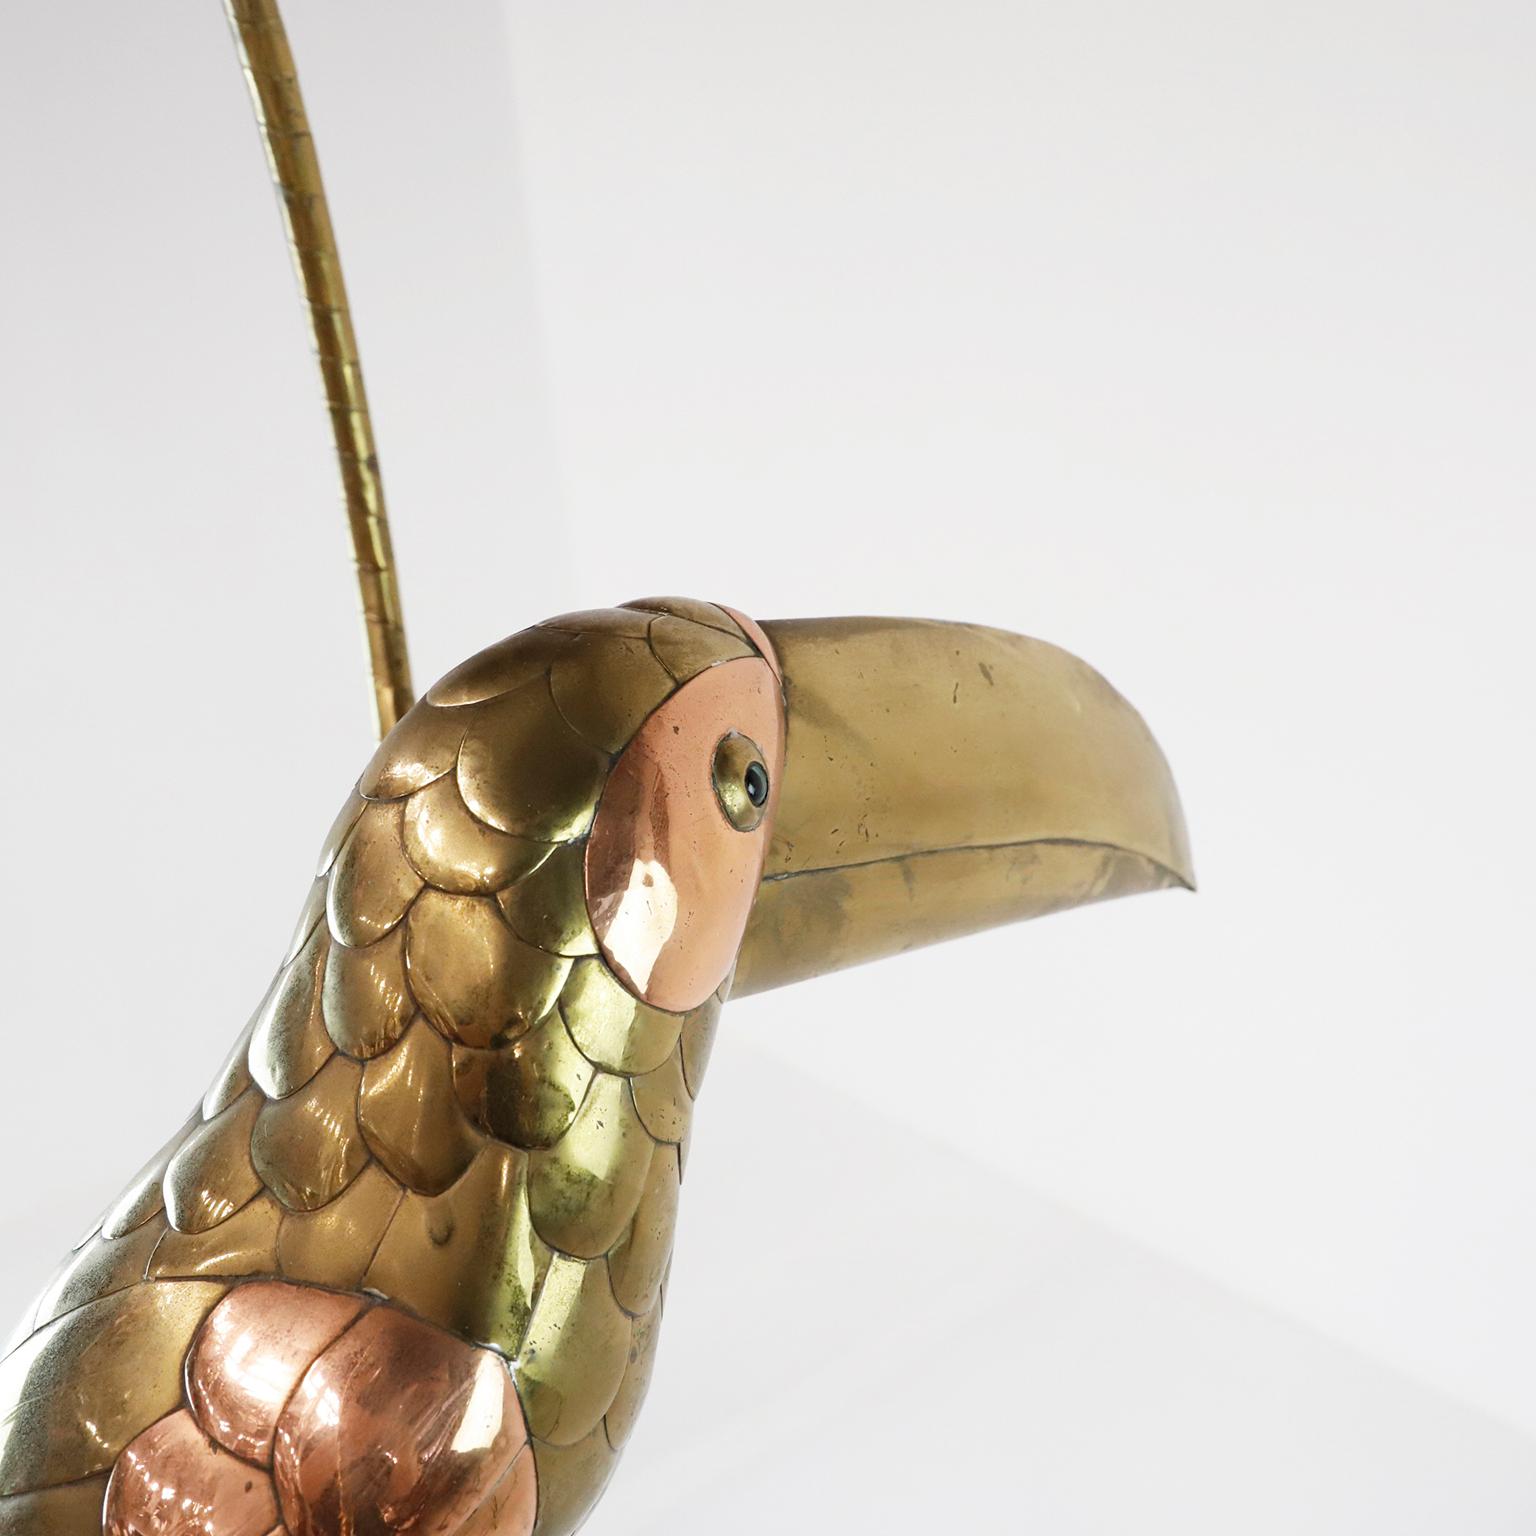 We offer this toucan sculpture by Mexican artist Sergio Bustamante, circa 1960 made in brass and copper. Present some details.